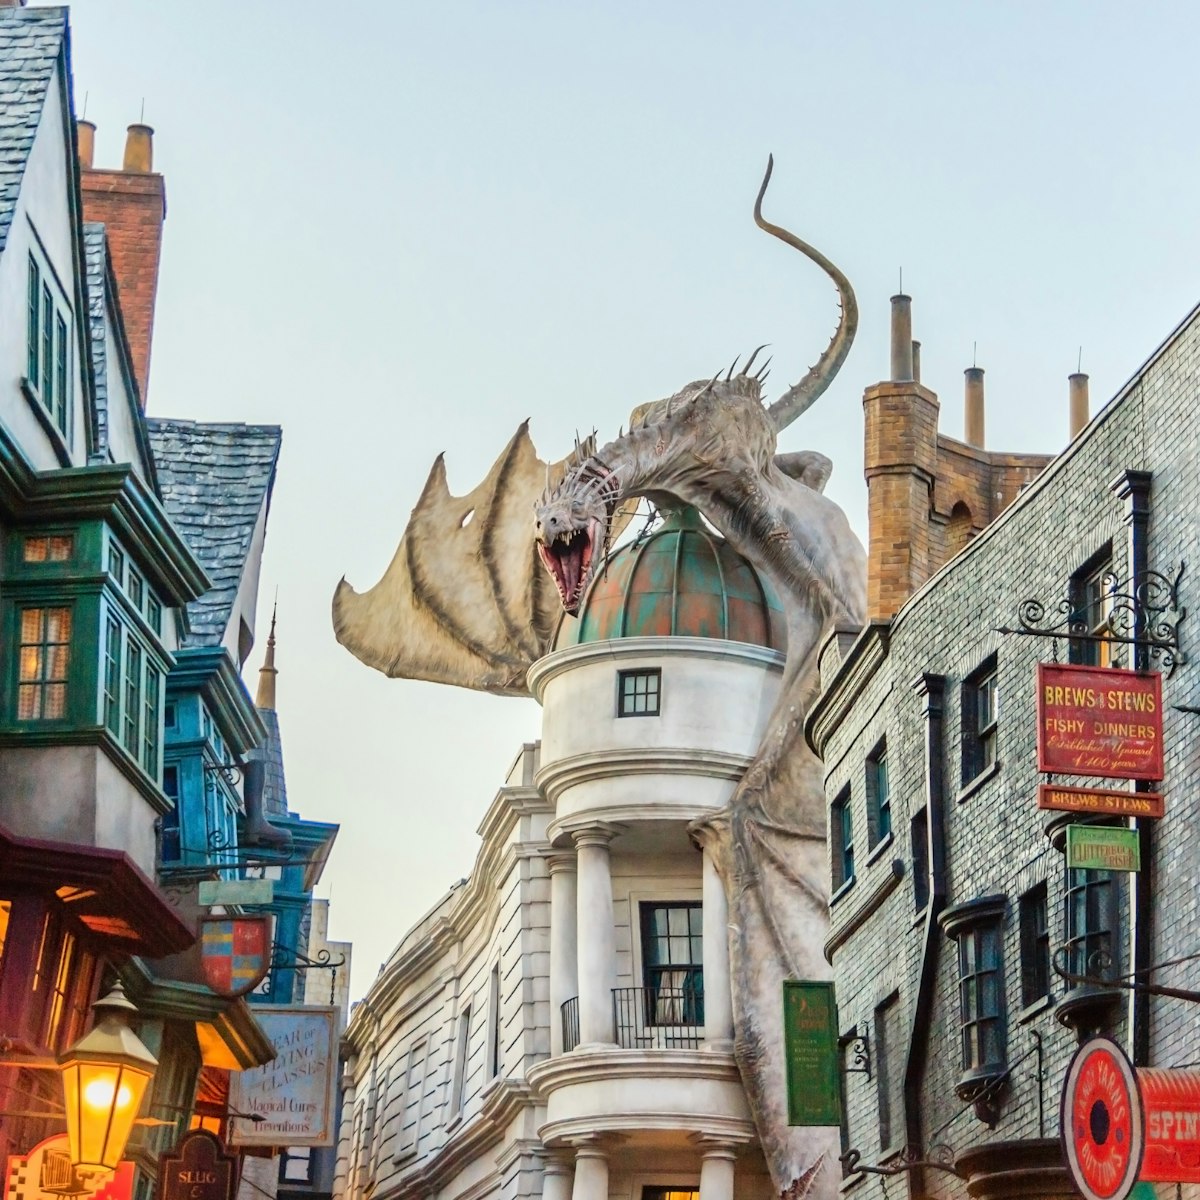 Diagon Alley in The Wizarding World of Harry Potter at Universal Studios Orlando. 